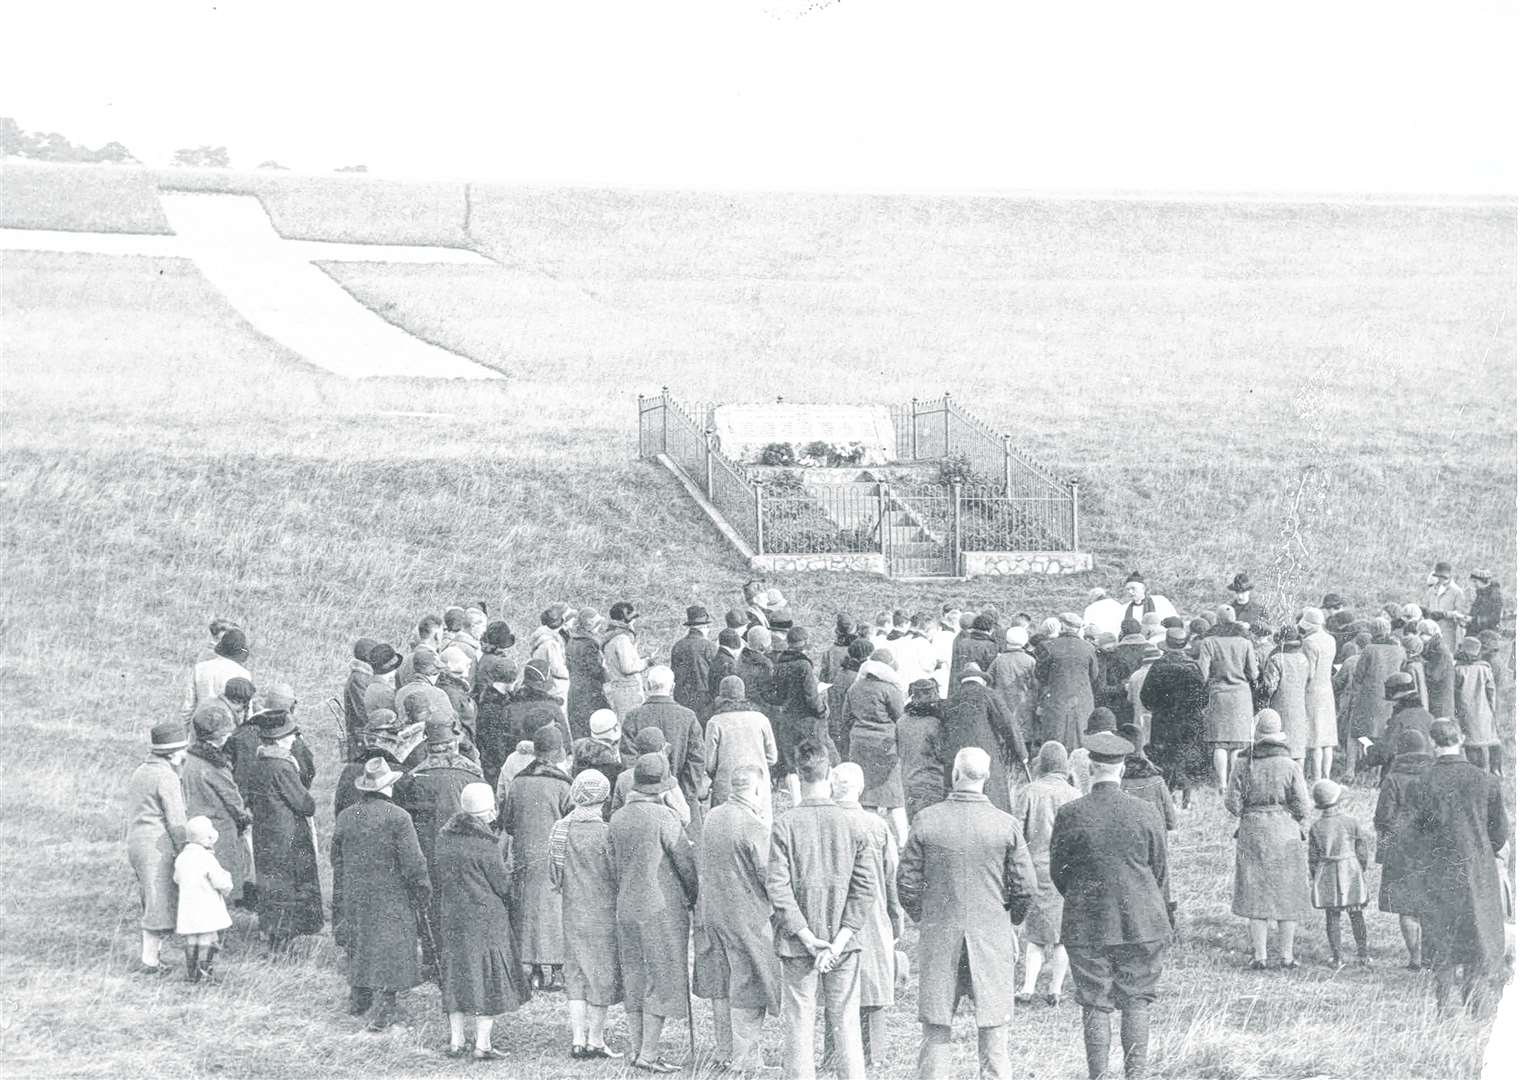 A Remembrance Day service held at Lenham Cross in 1930